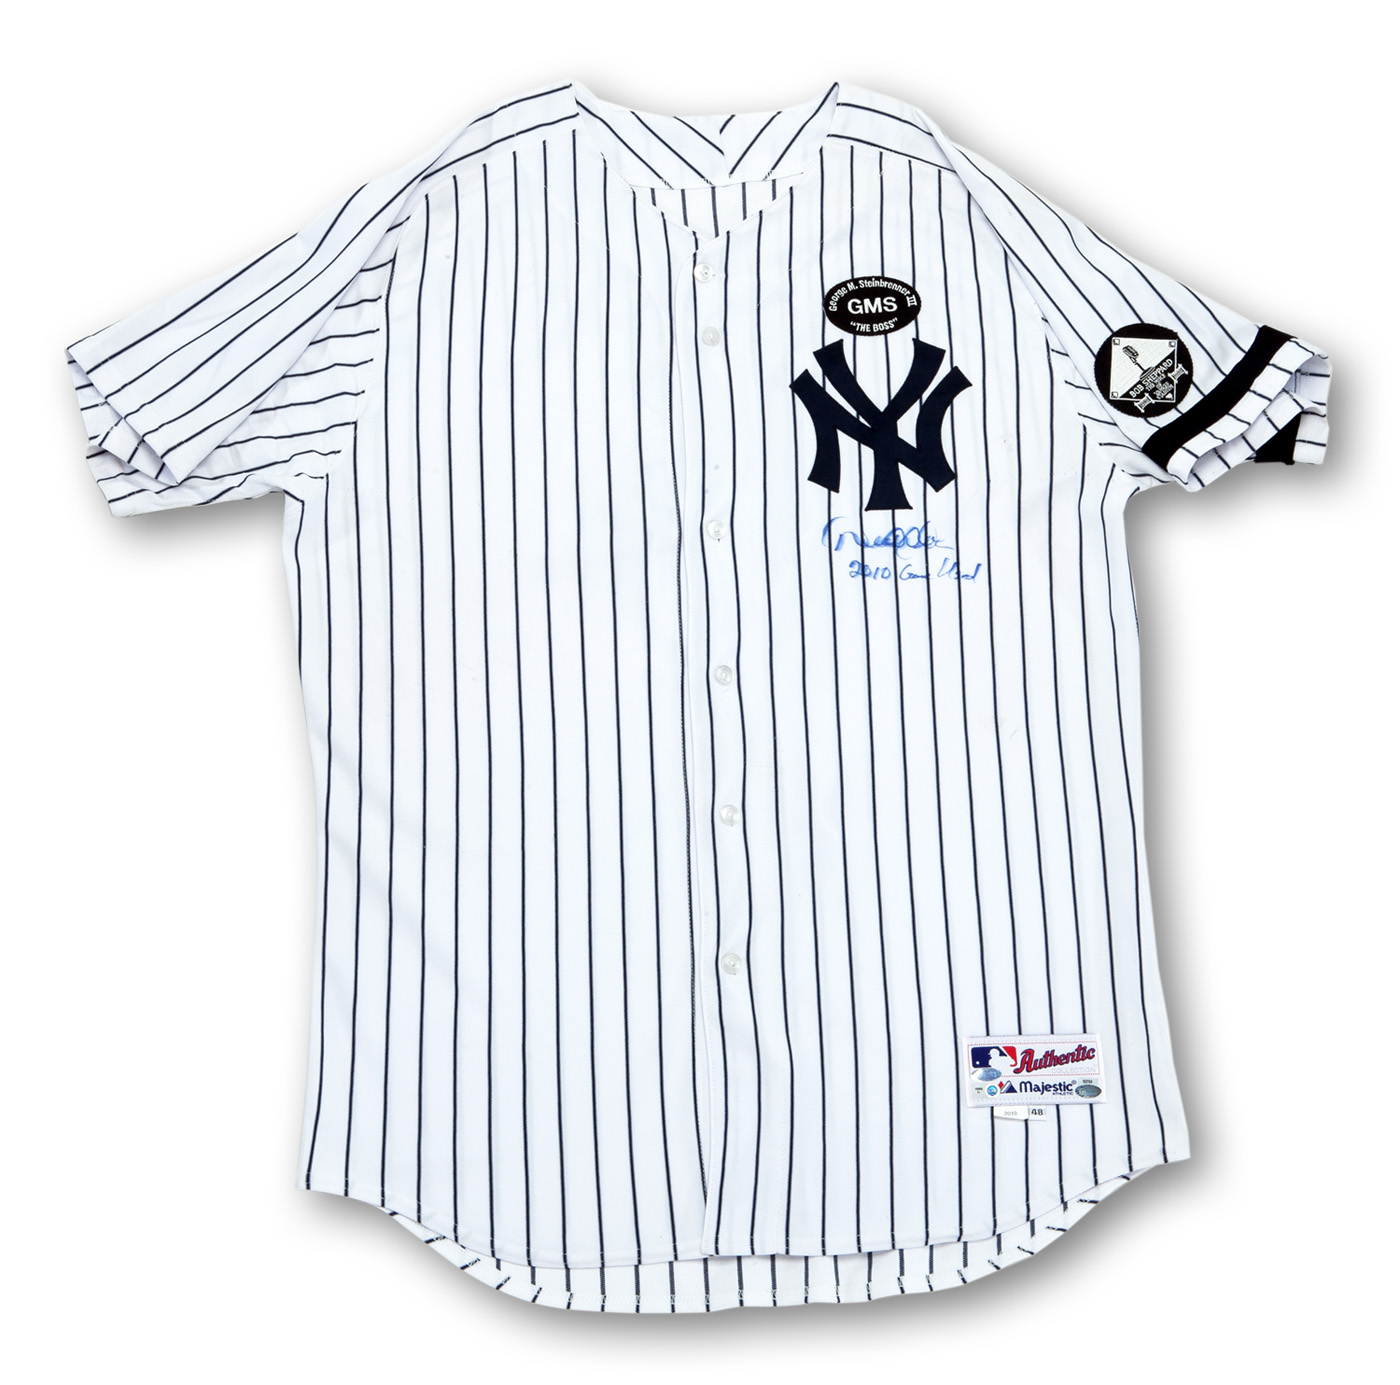 Derek Jeter Signed New York Yankees Authentic Majestic Jersey With